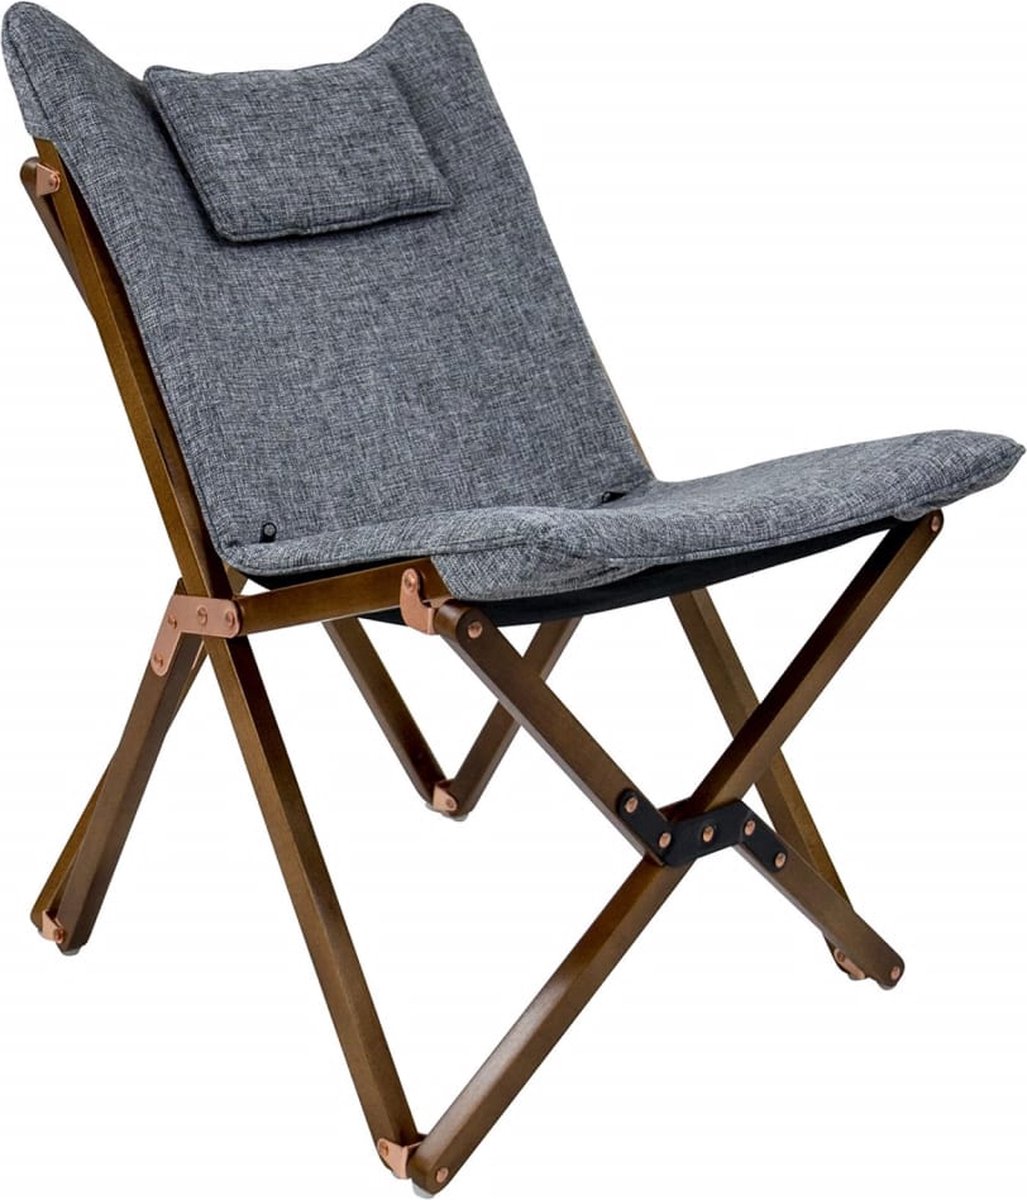 Bo-Camp Urban Outdoor collection - Relaxstoel - Bloomsbury - S - Oxford polyester - Grijs